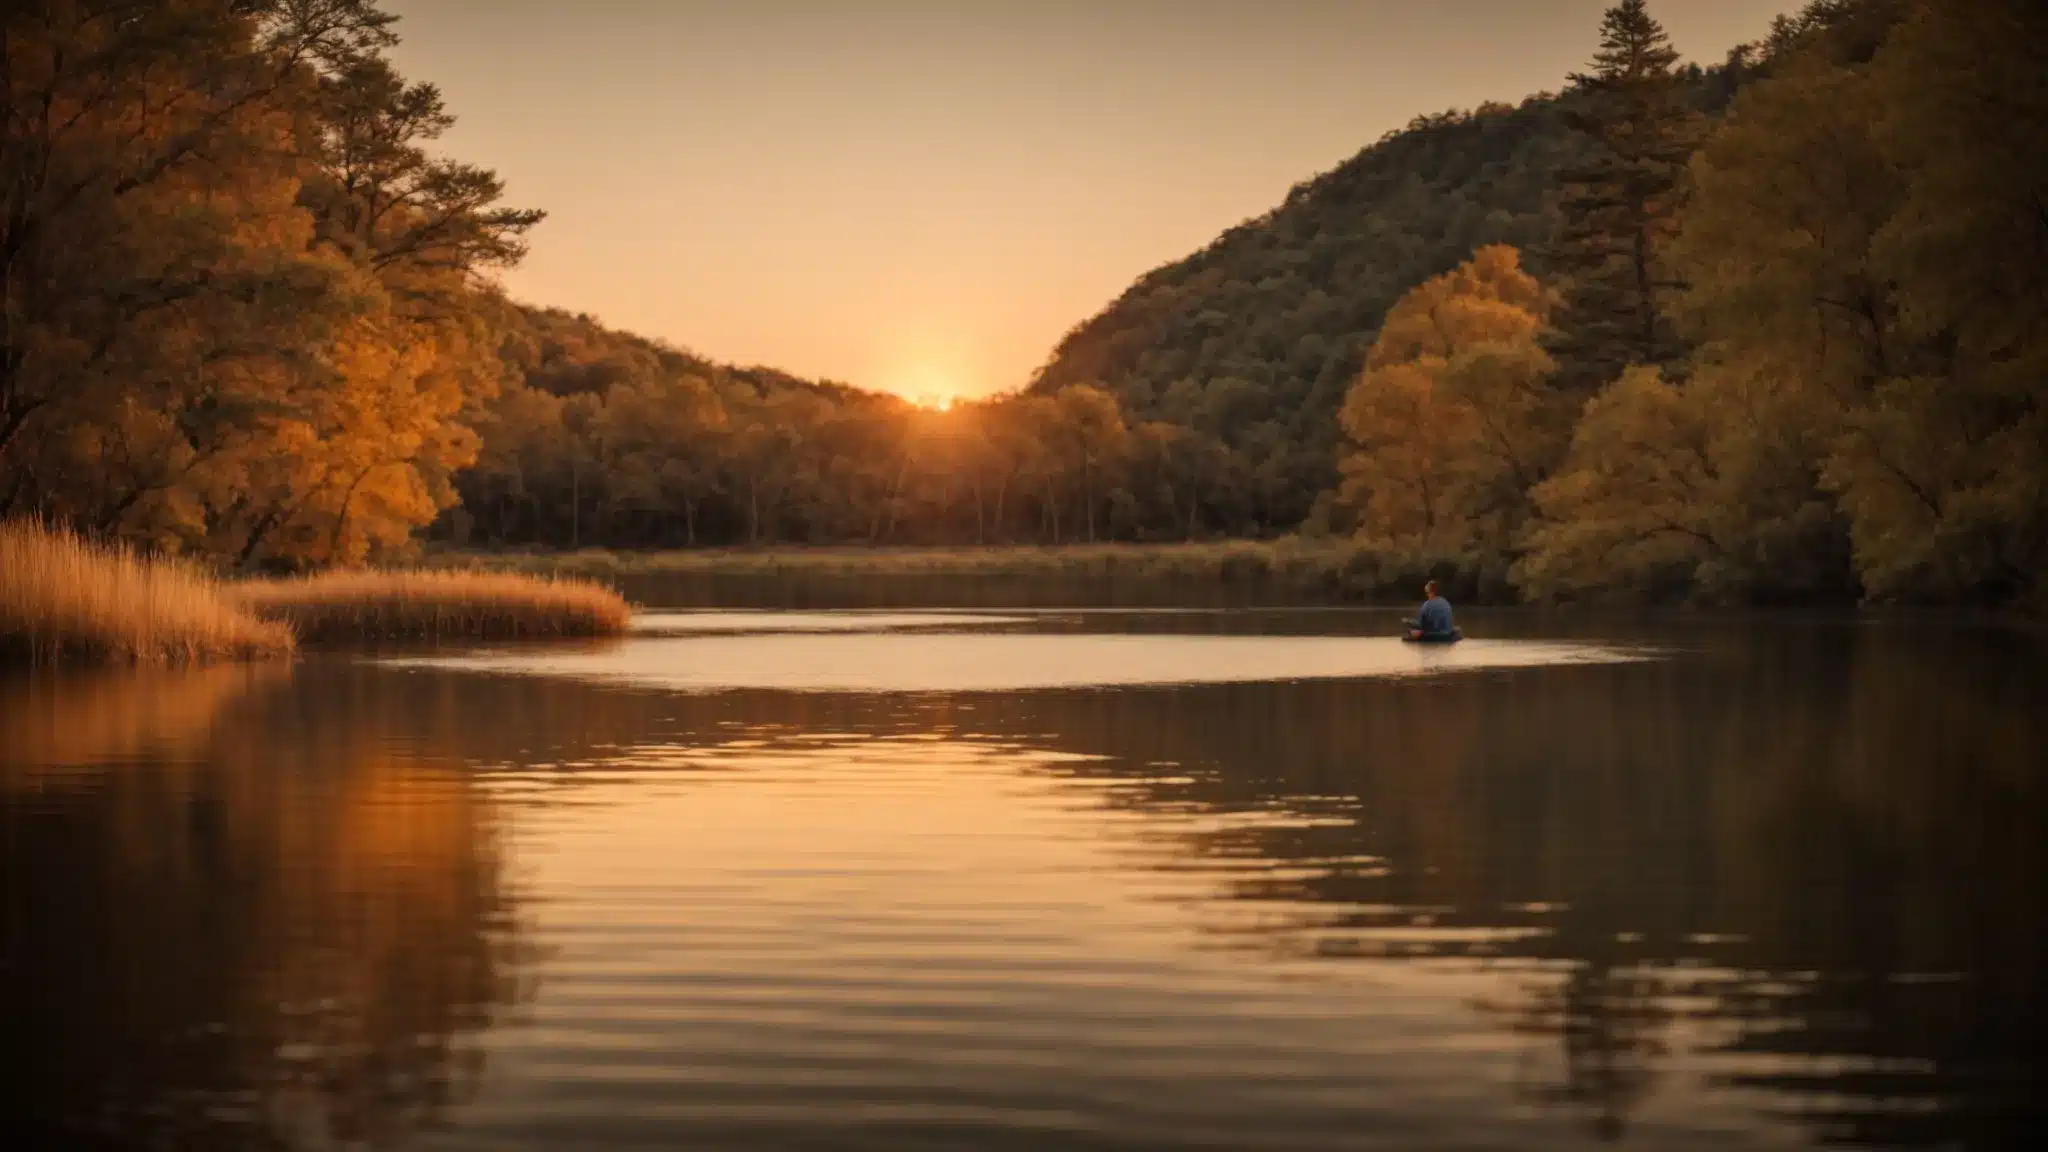 A serene lake at sunset with a single person meditating